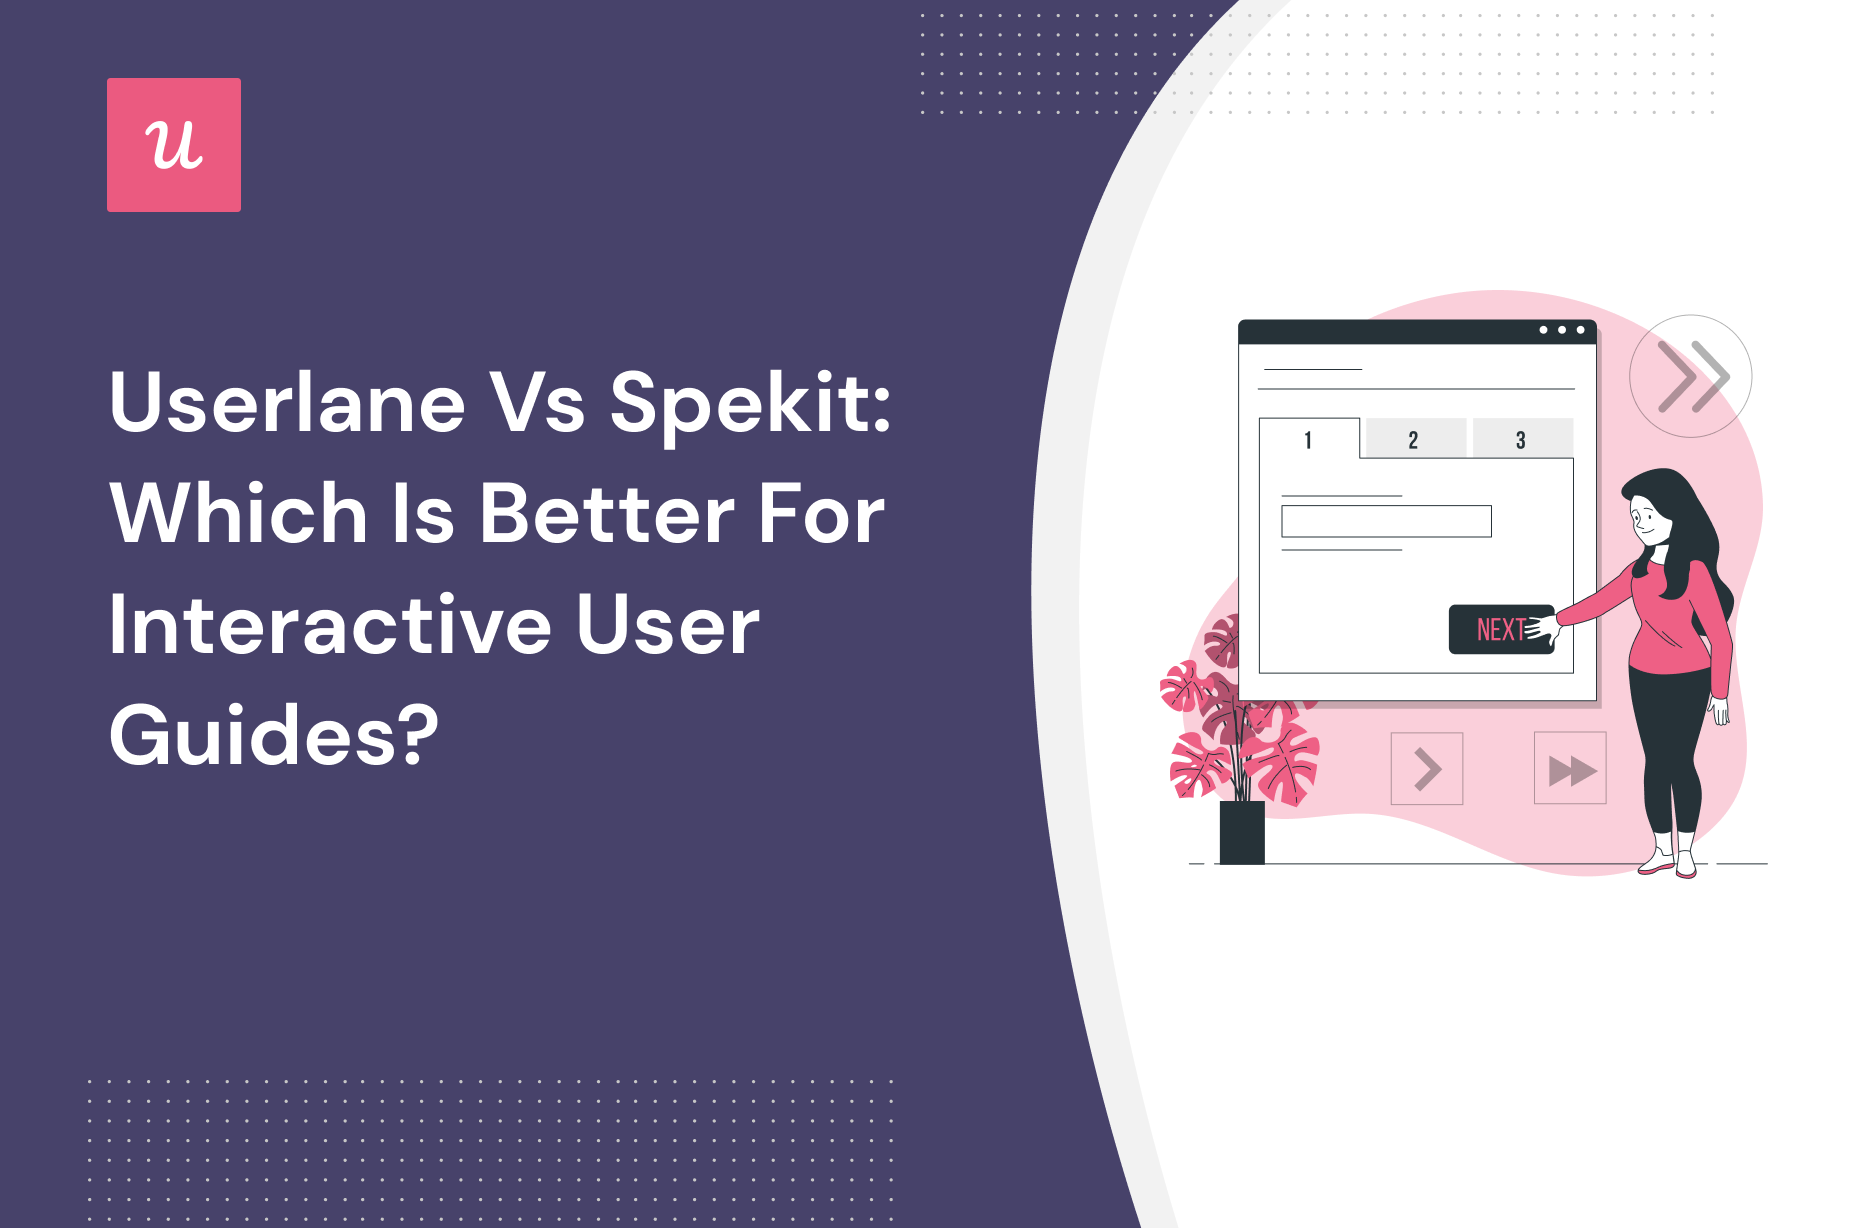 Userlane vs Spekit: Which is Better for Interactive User Guides?